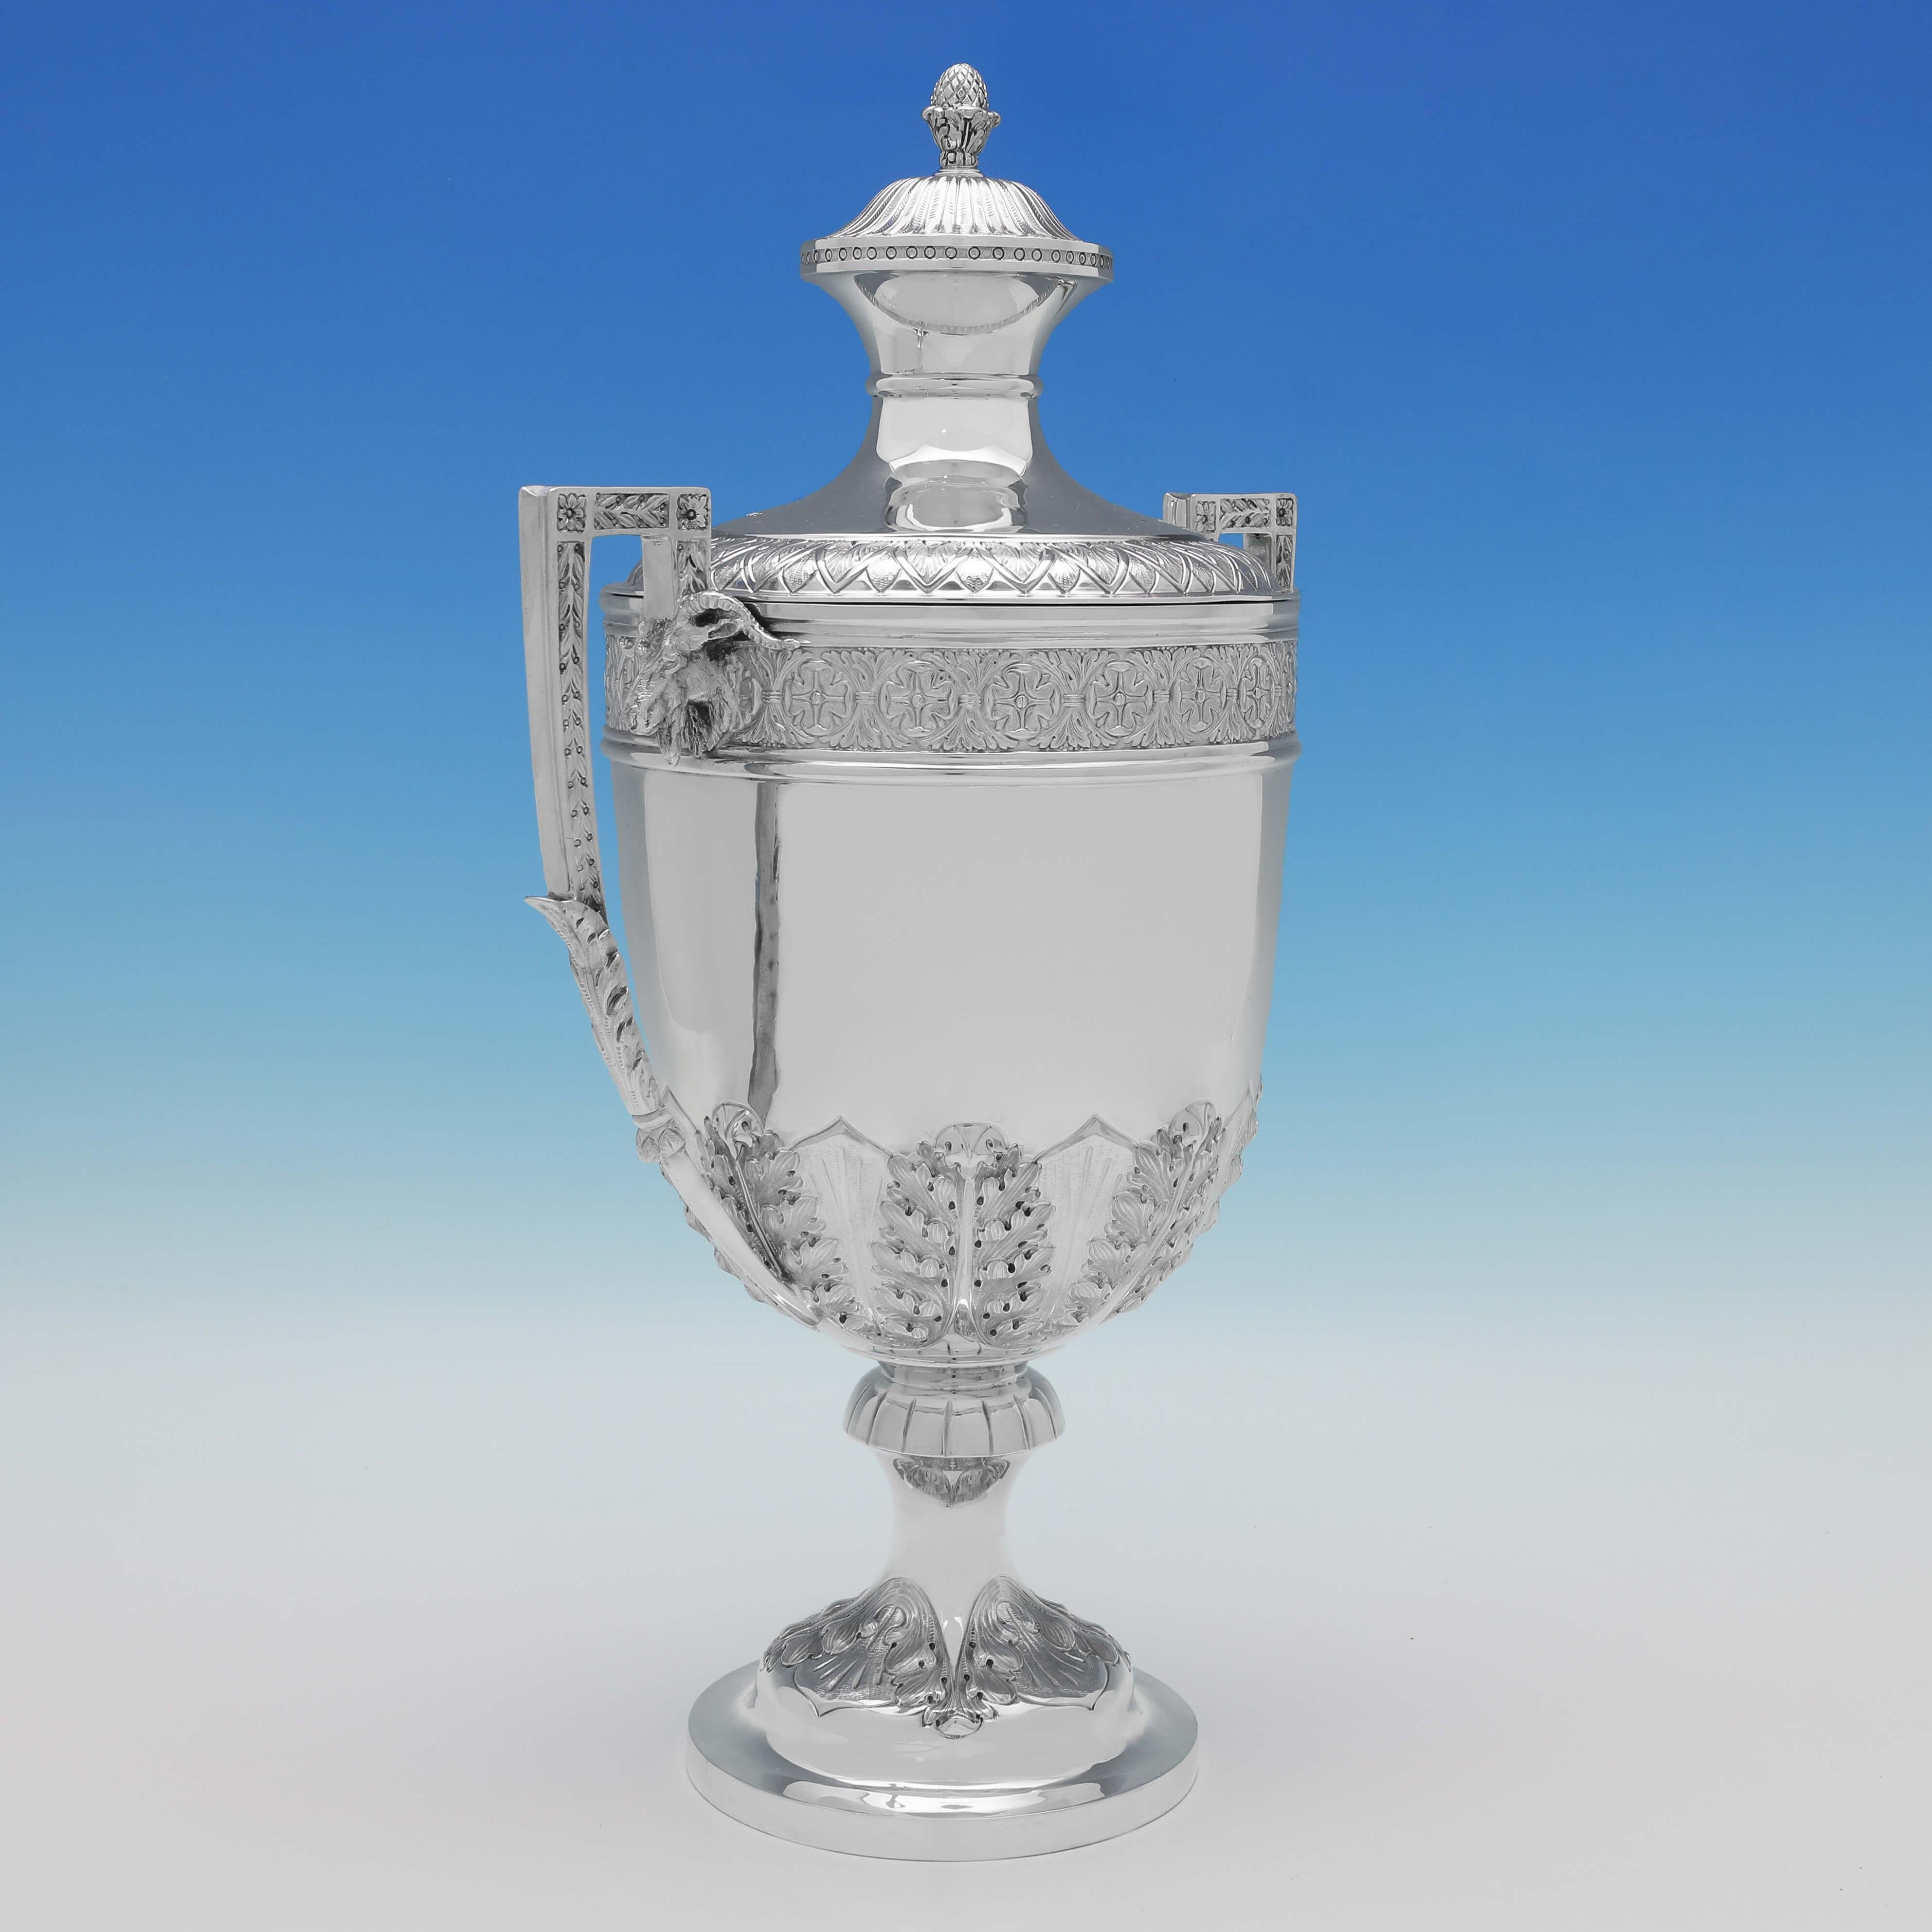 Hallmarked in Sheffield in 1902 by Mappin & Webb, this striking, Edwardian, Antique Sterling Silver Trophy Cup & Cover, is in the Neoclassical Revival taste, featuring a pineapple finial, chased anthemion leaves around the body, and rams head masks